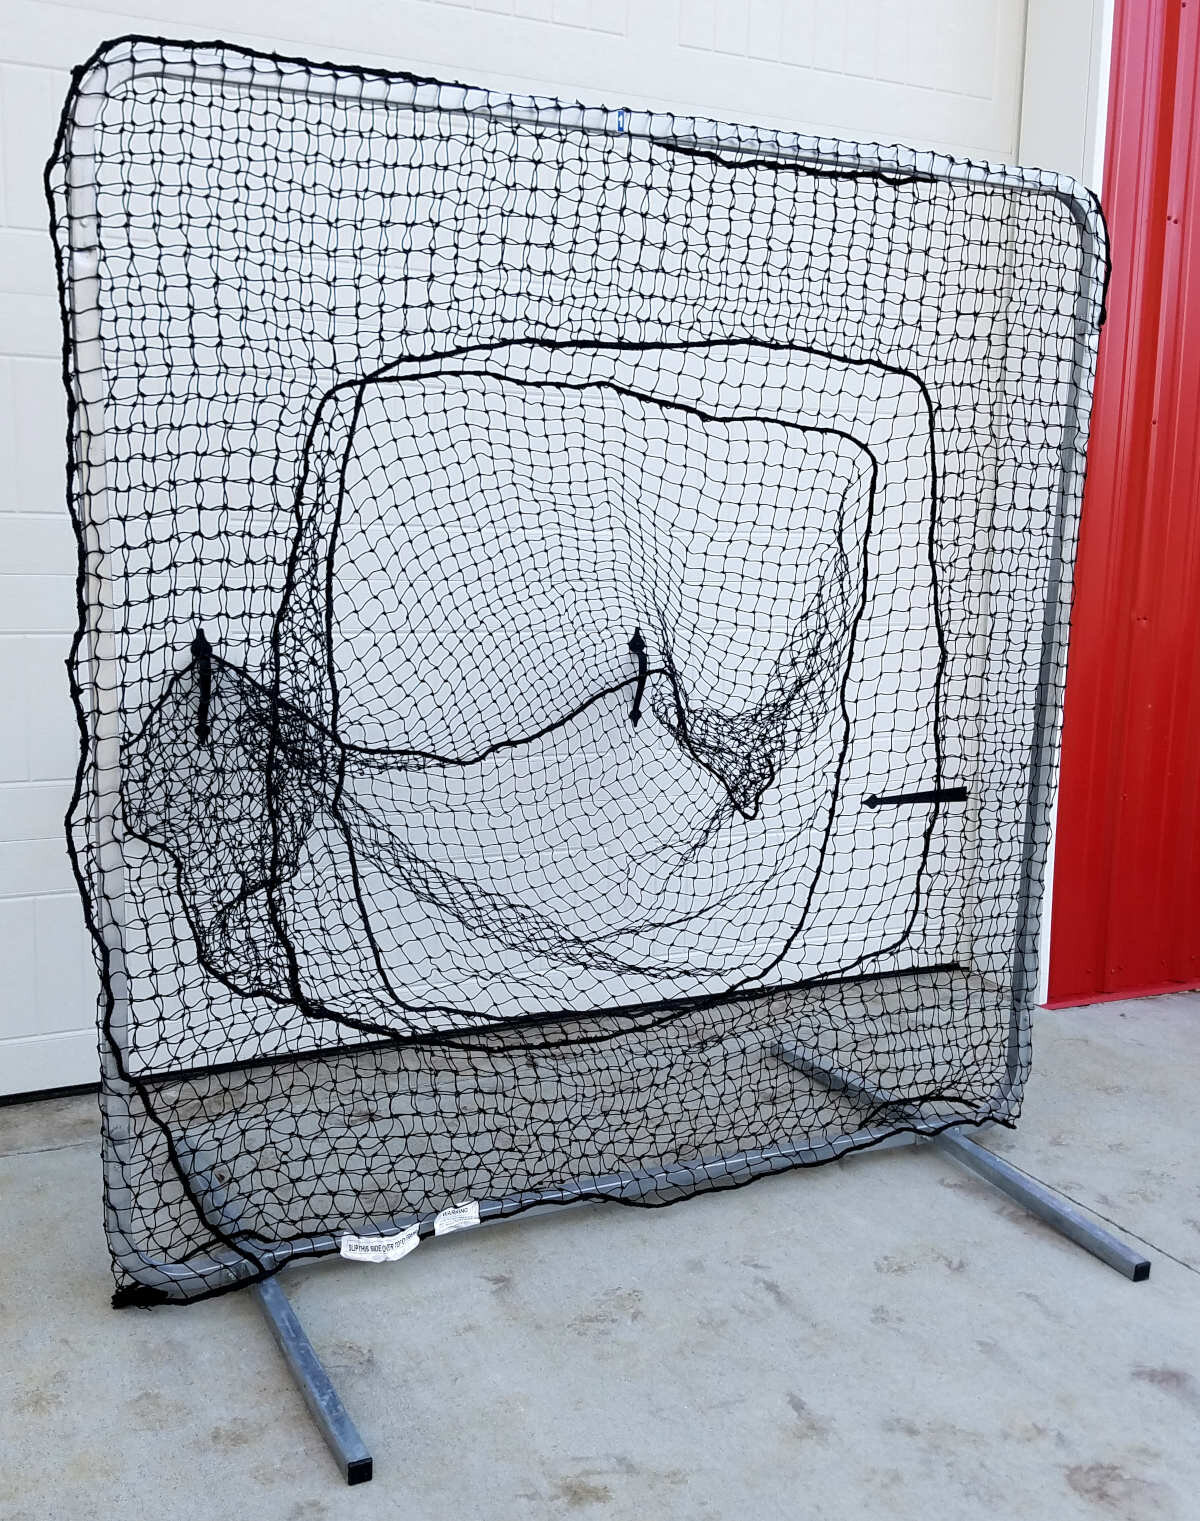 L-Screen 7' x 7' Residential Baseball Safety Frame & #42-60Ply Pitcher L Screen 